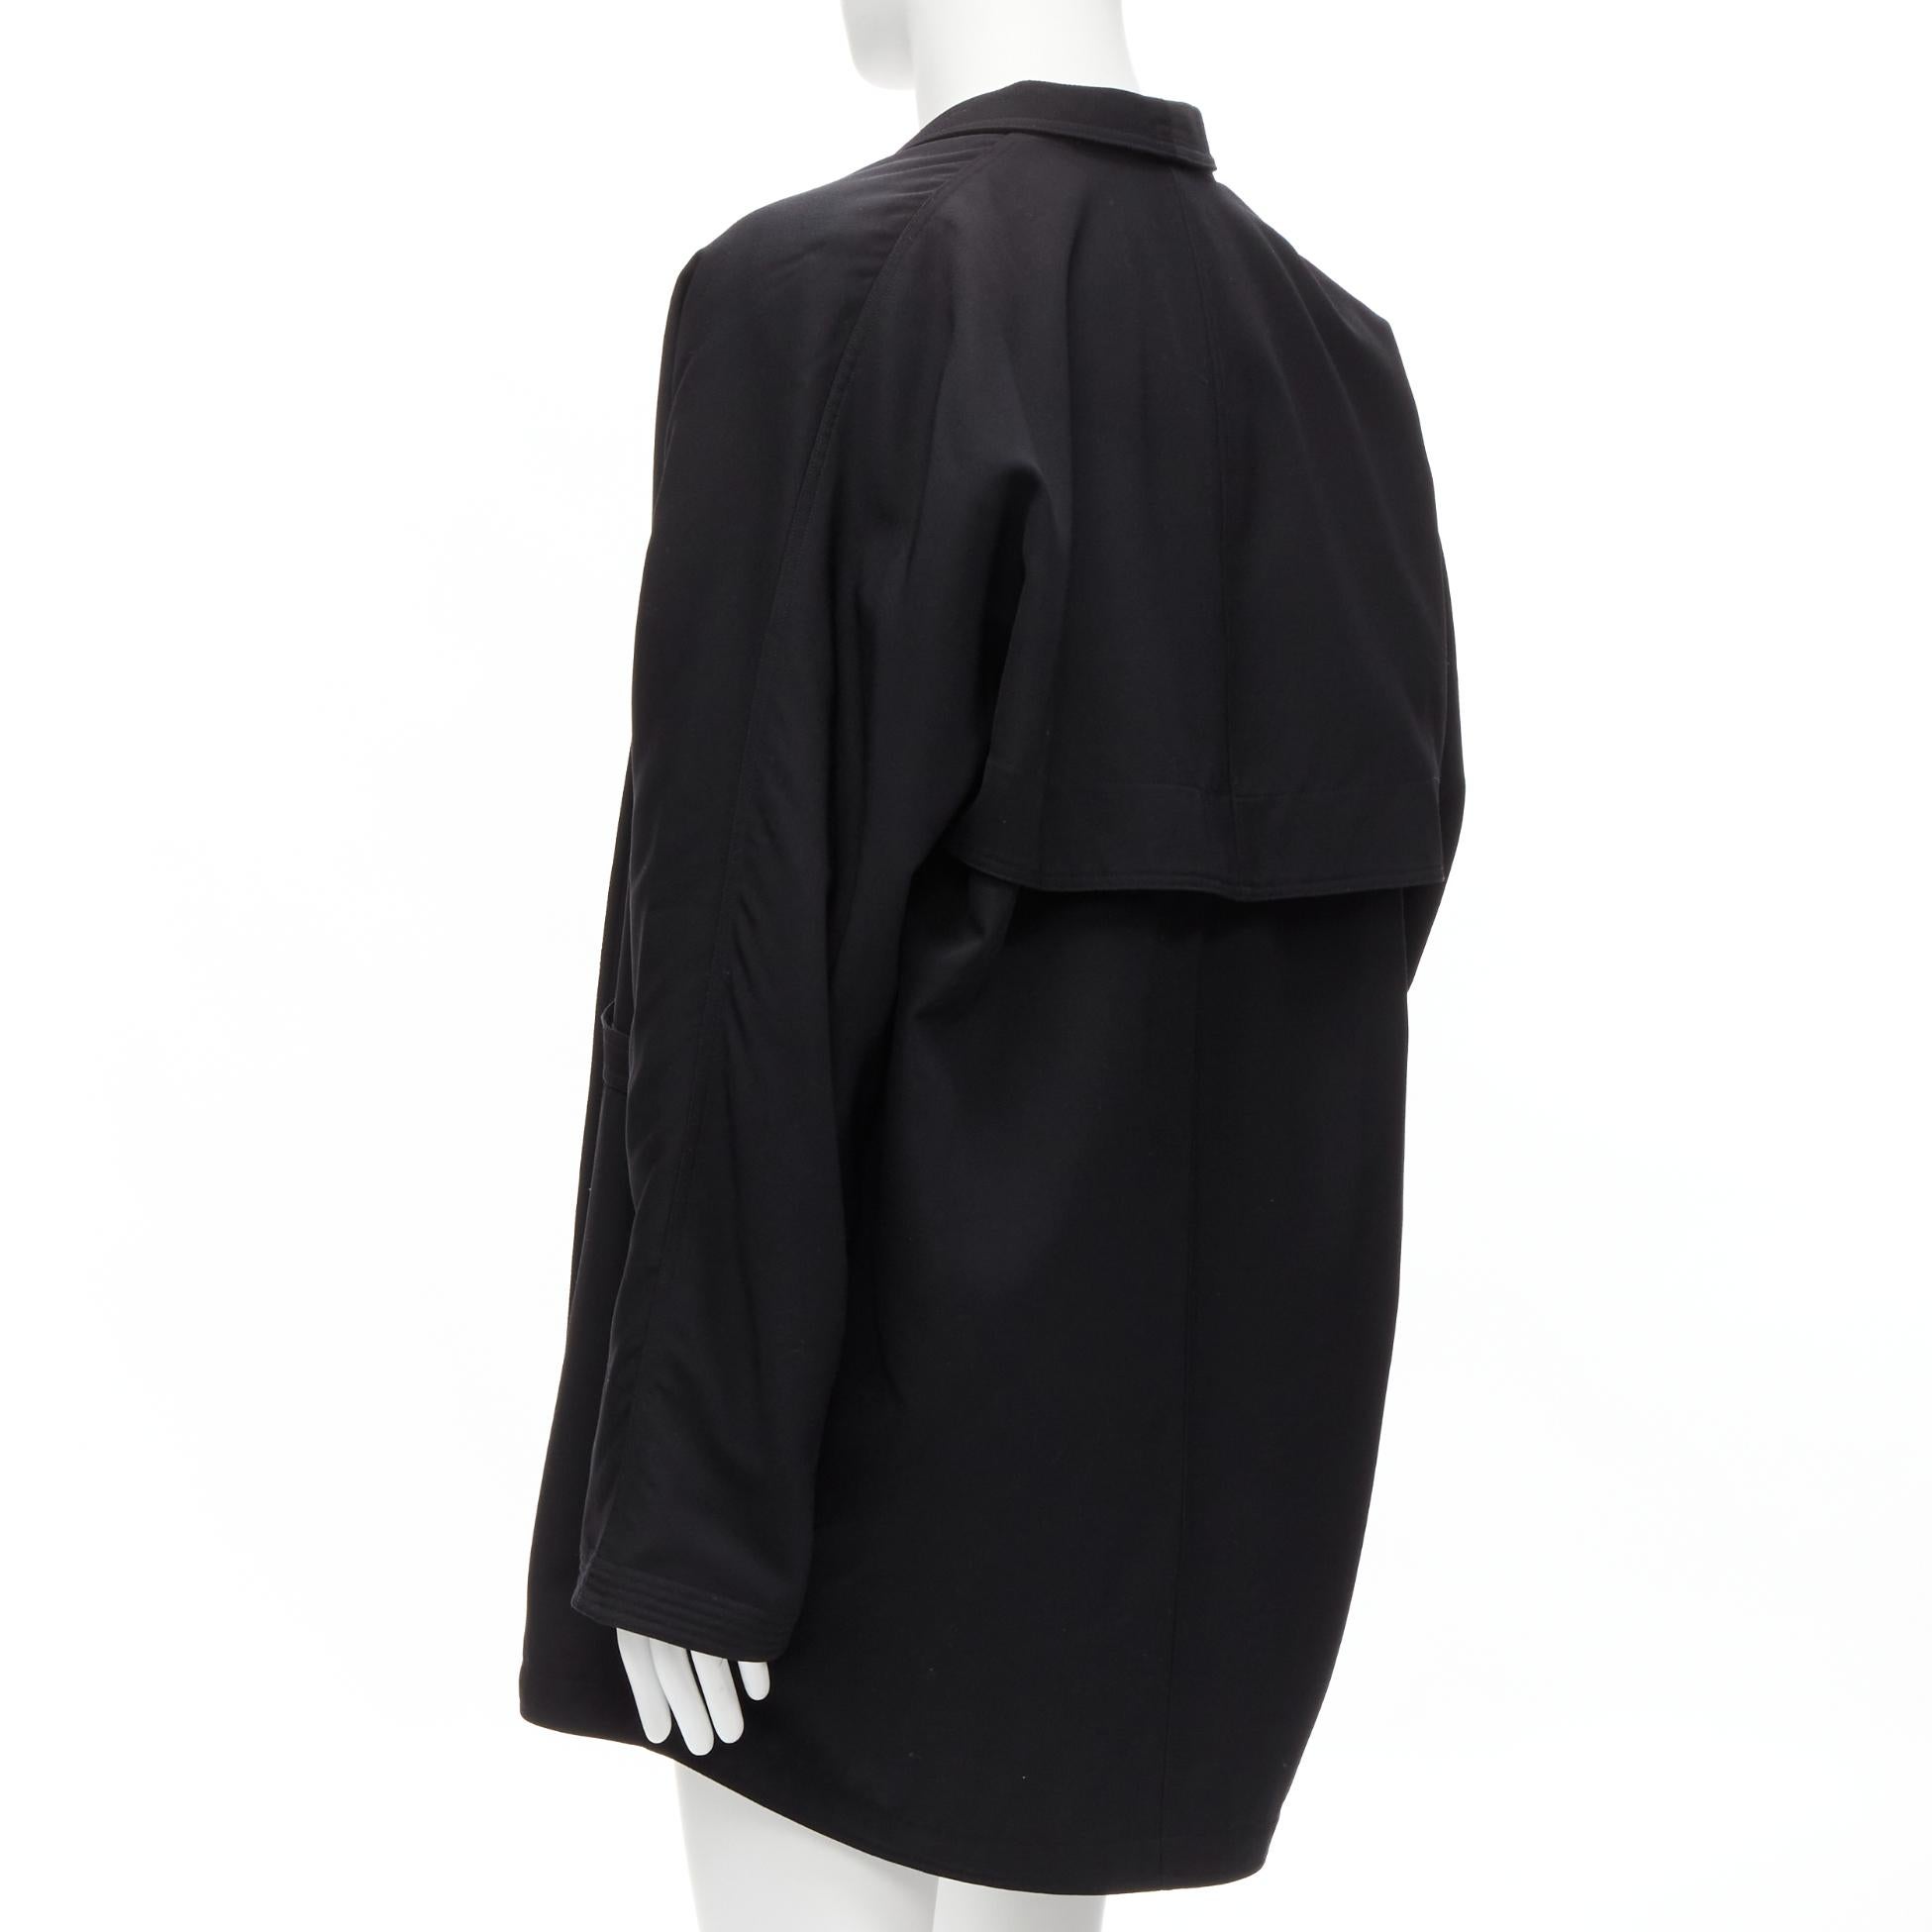 GIANNI VERSACE Vintage 100% wool black gold barocco lined robe coat jacket For Sale 2